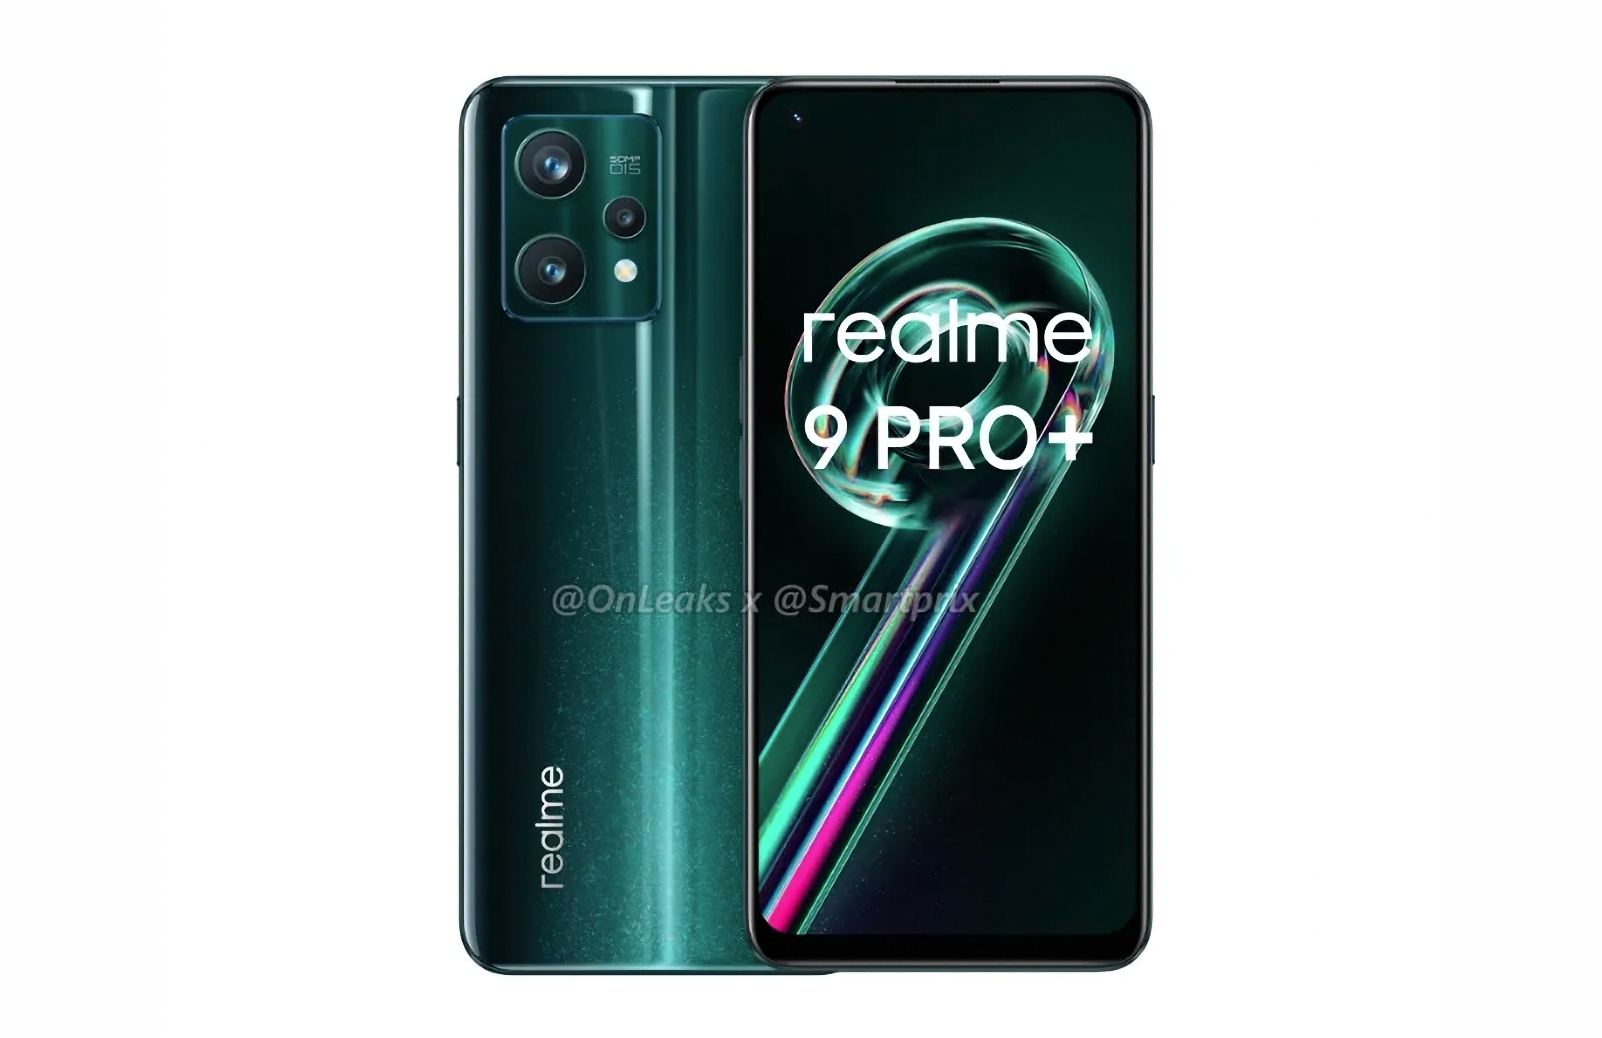 realme teases realme 9 Pro+, the first smartphone in Europe with MediaTek Dimensity 920 chip on board